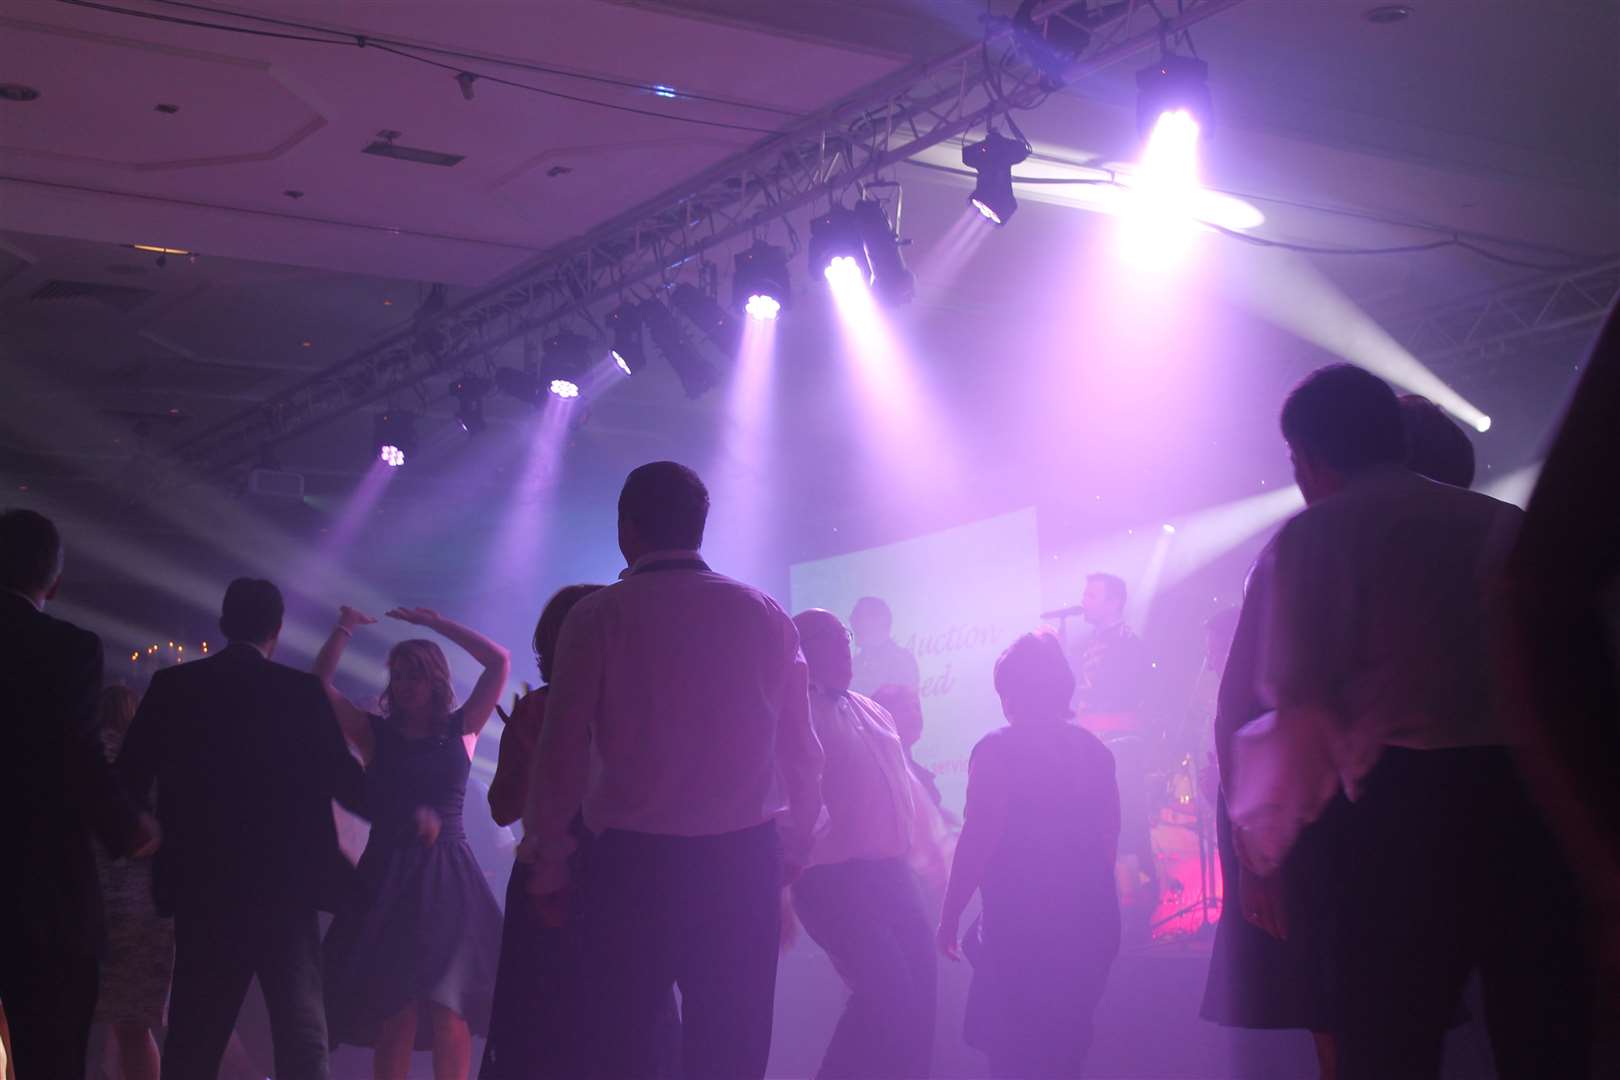 North East Sensory Services will hold its "fabulous funkylicious" fundraising ball in November.